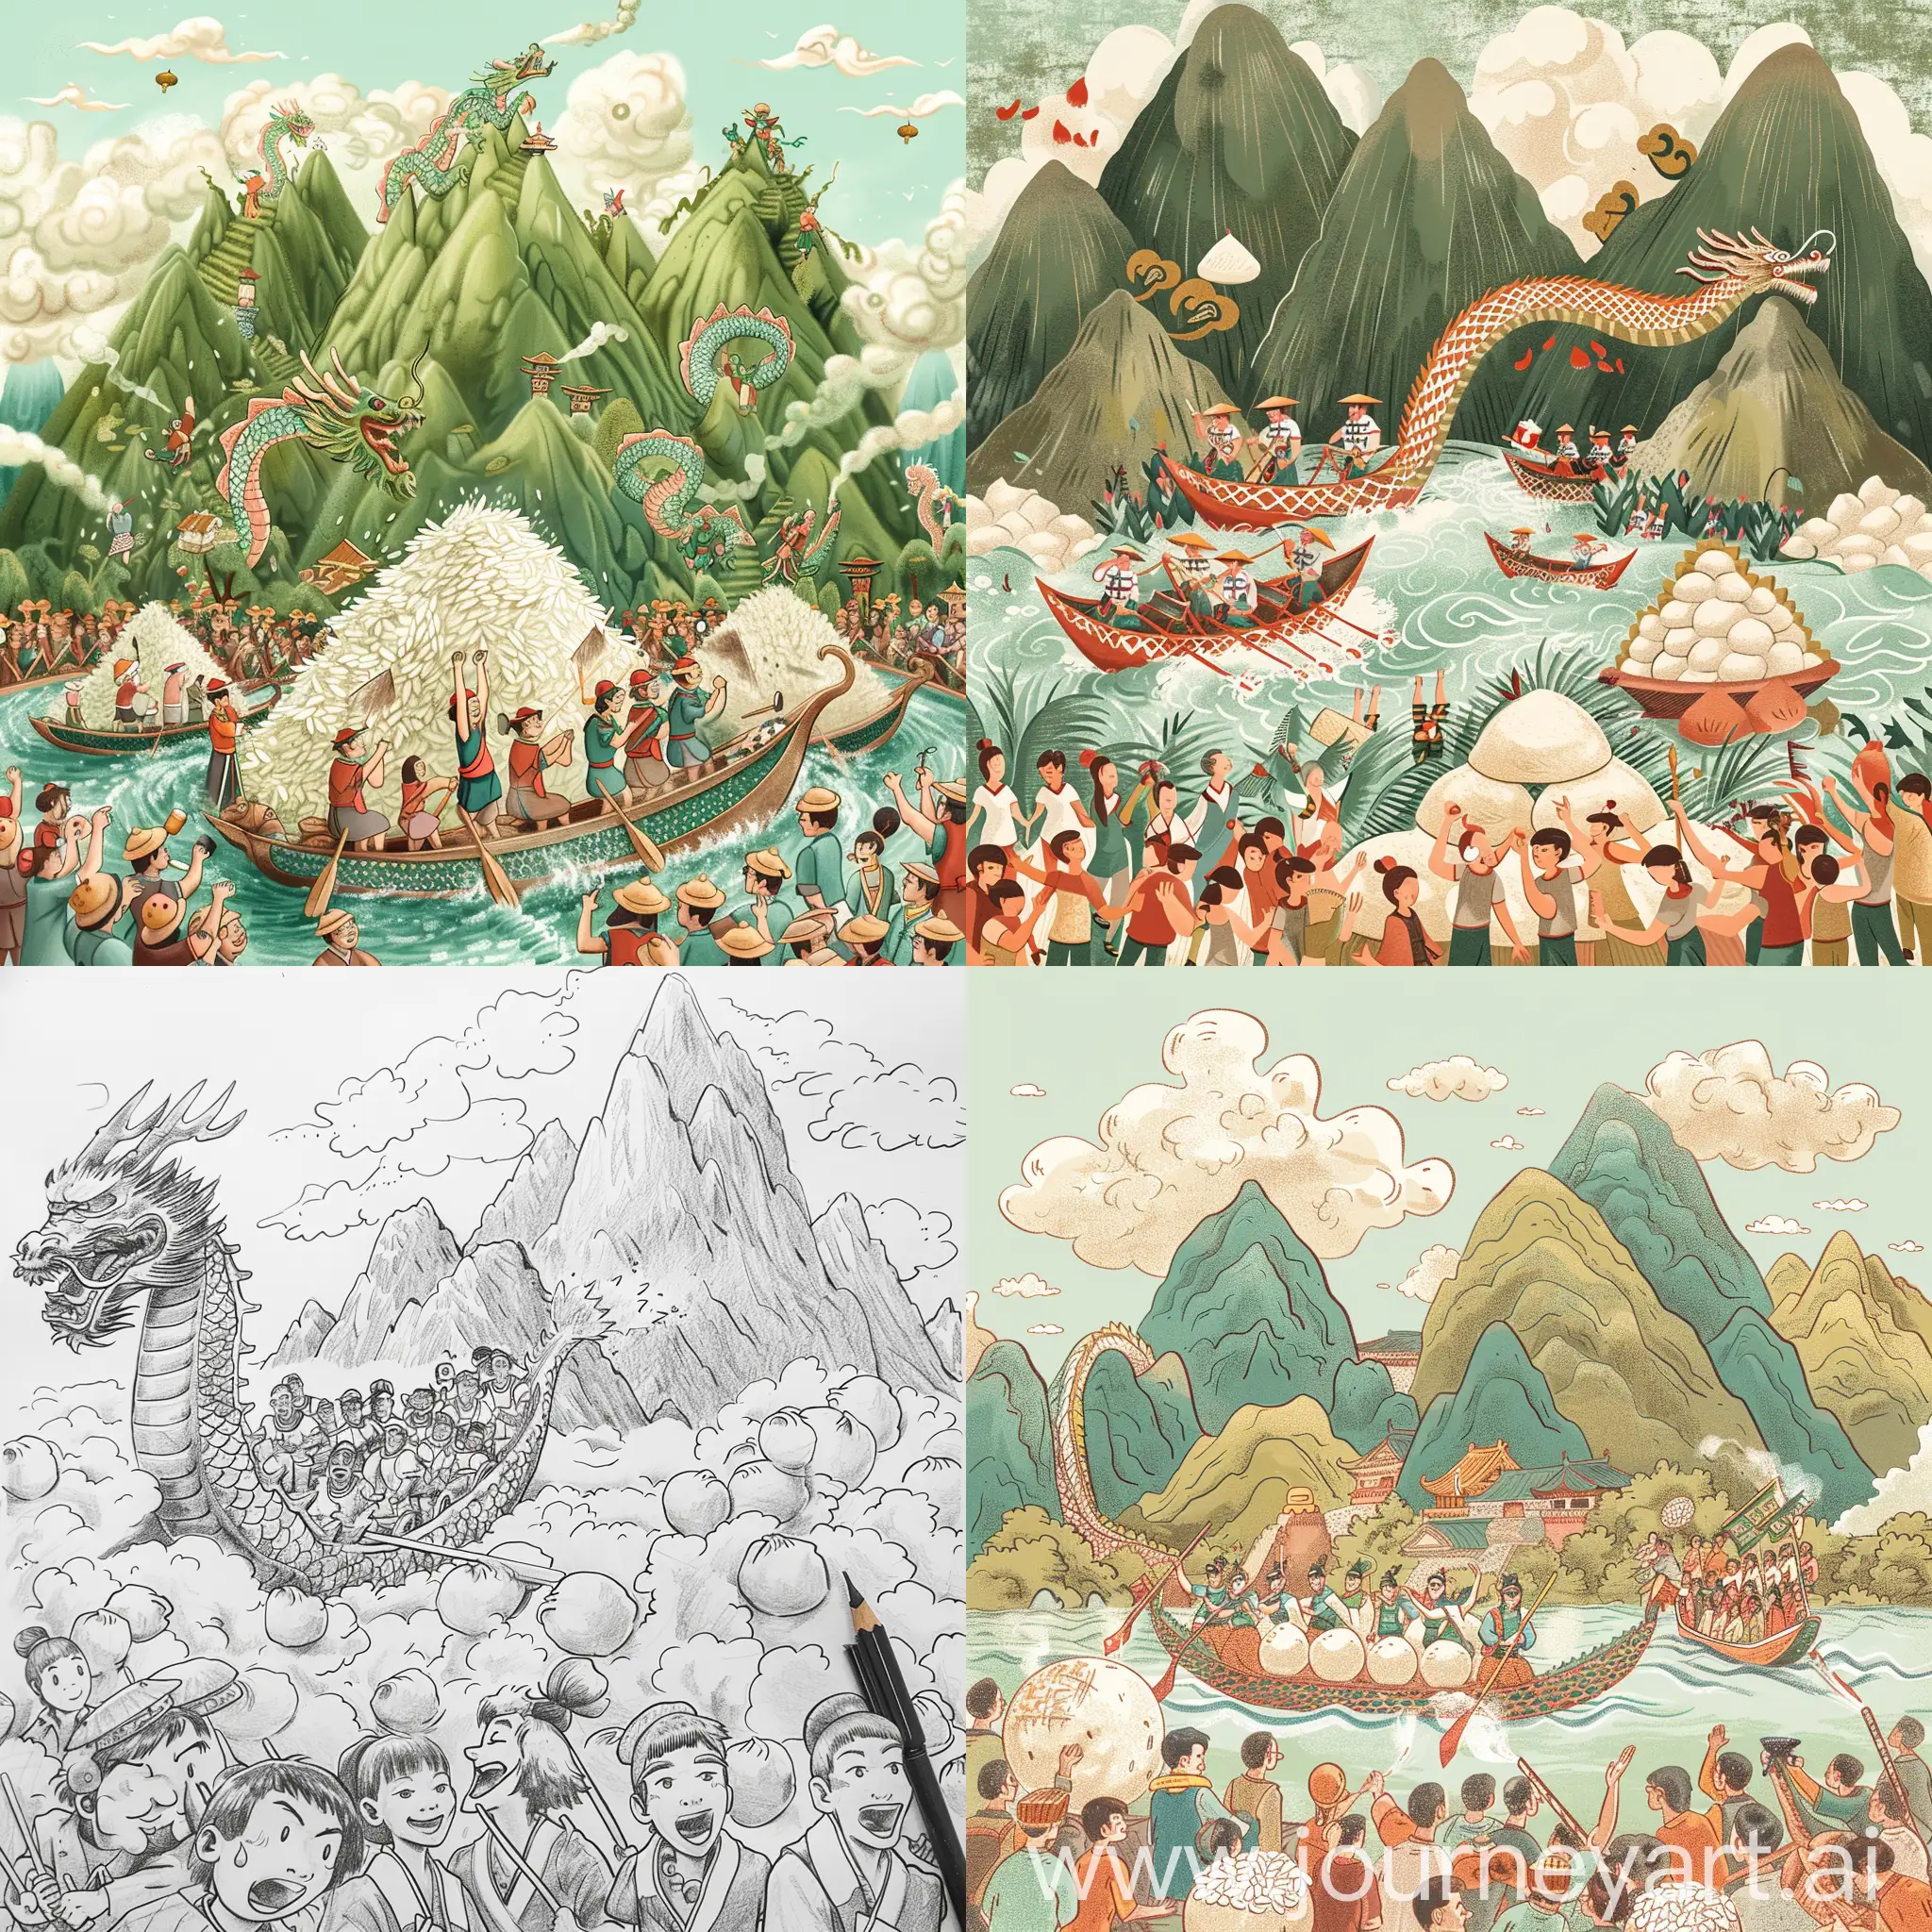 Joyful-Dragon-Boat-Festival-Racing-on-the-River-with-Mountains-of-Rice-Dumplings